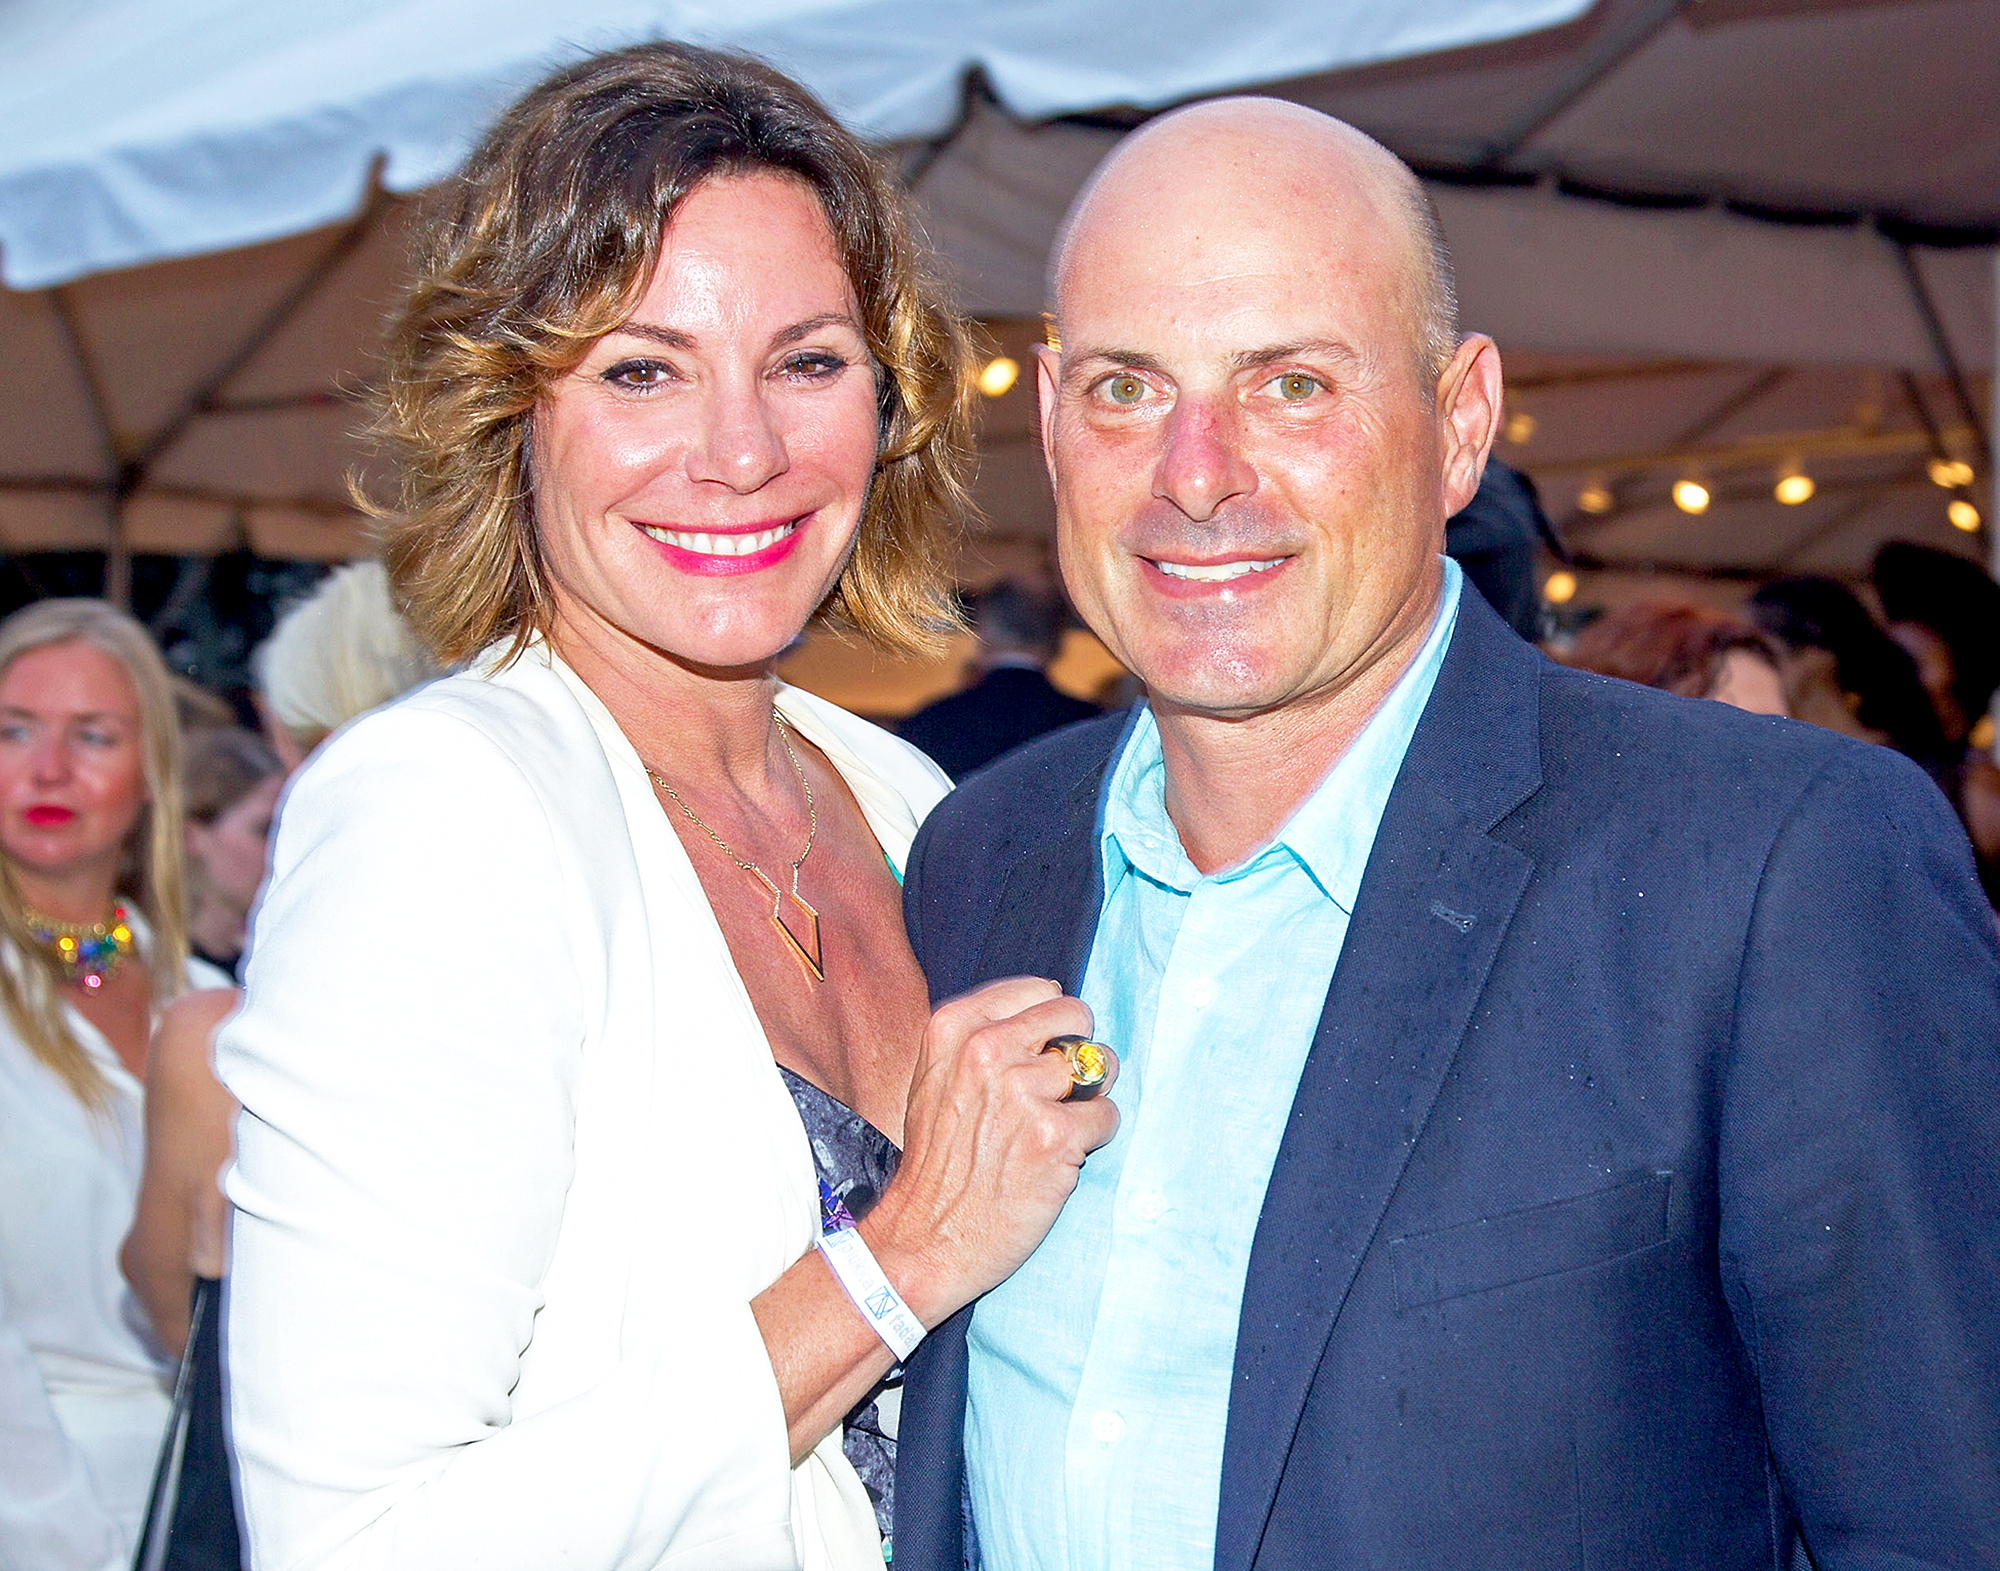 is luann de lesseps dating anyone